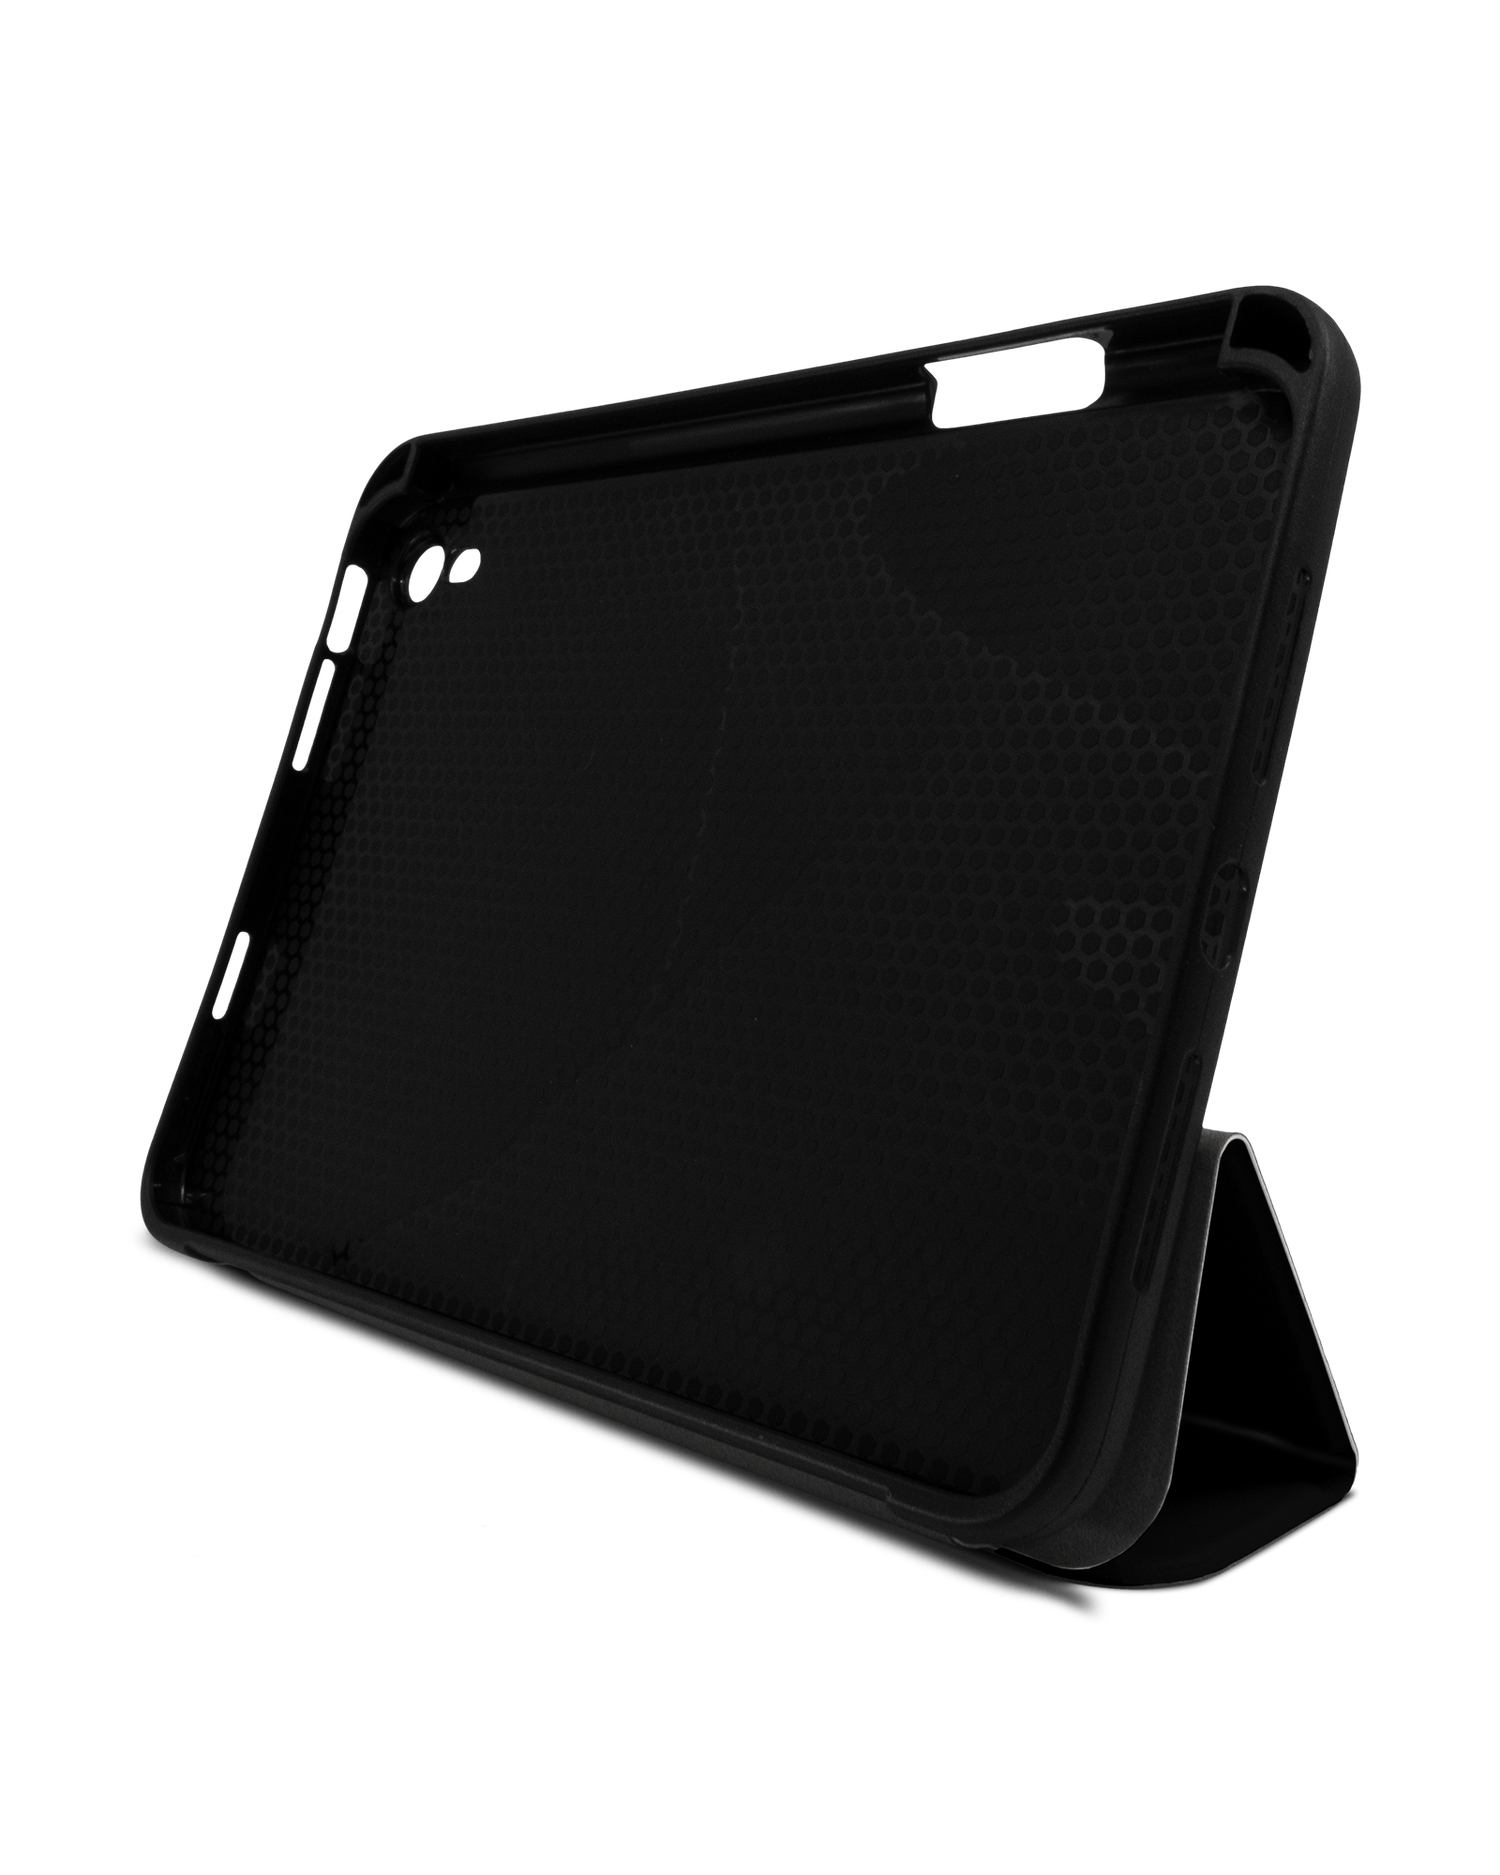 Black Cat iPad Case with Pencil Holder Apple iPad mini 6 (2021): Set up in landscape format (front view)